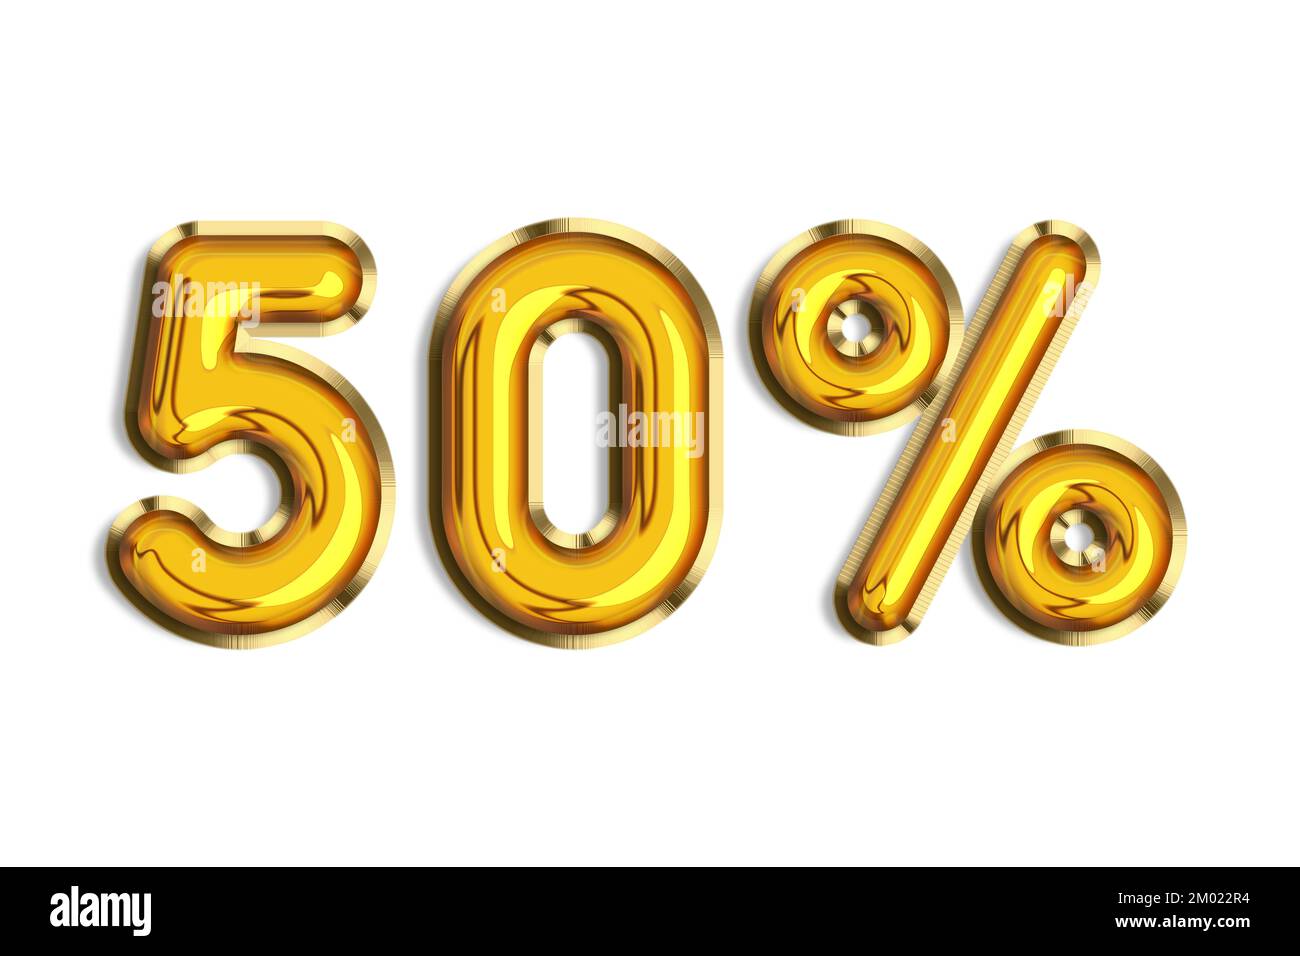 50% off discount promotion sale made of realistic 3d gold helium balloons. Illustration of golden percent symbols for selling poster, banner, ads. Num Stock Photo